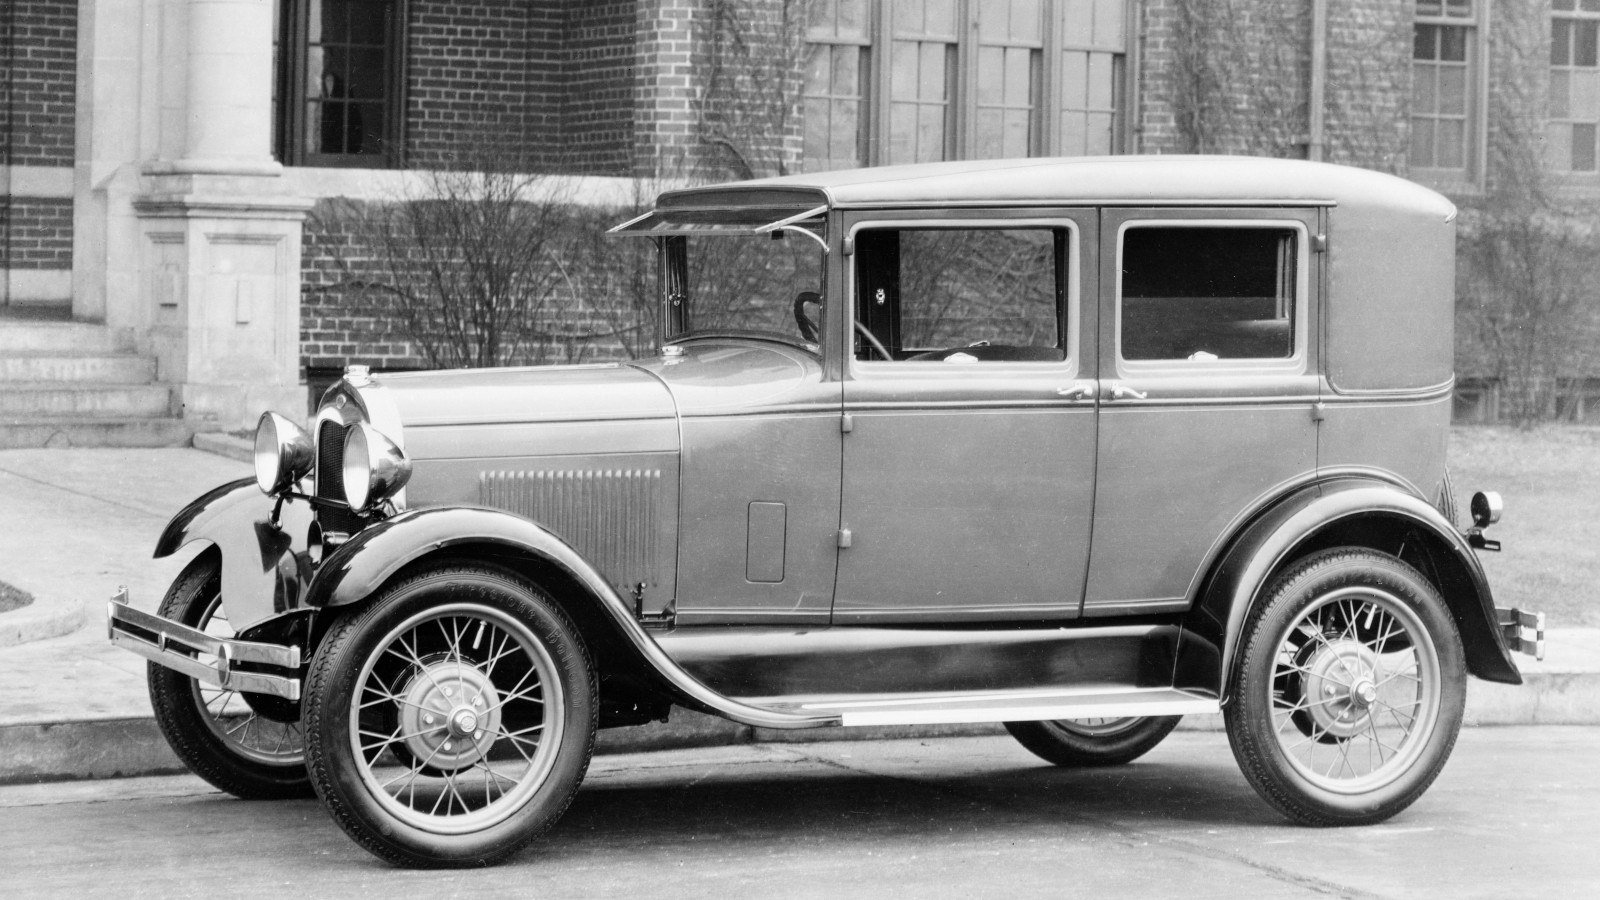 1927 – 1st Model A Ford sells for $385